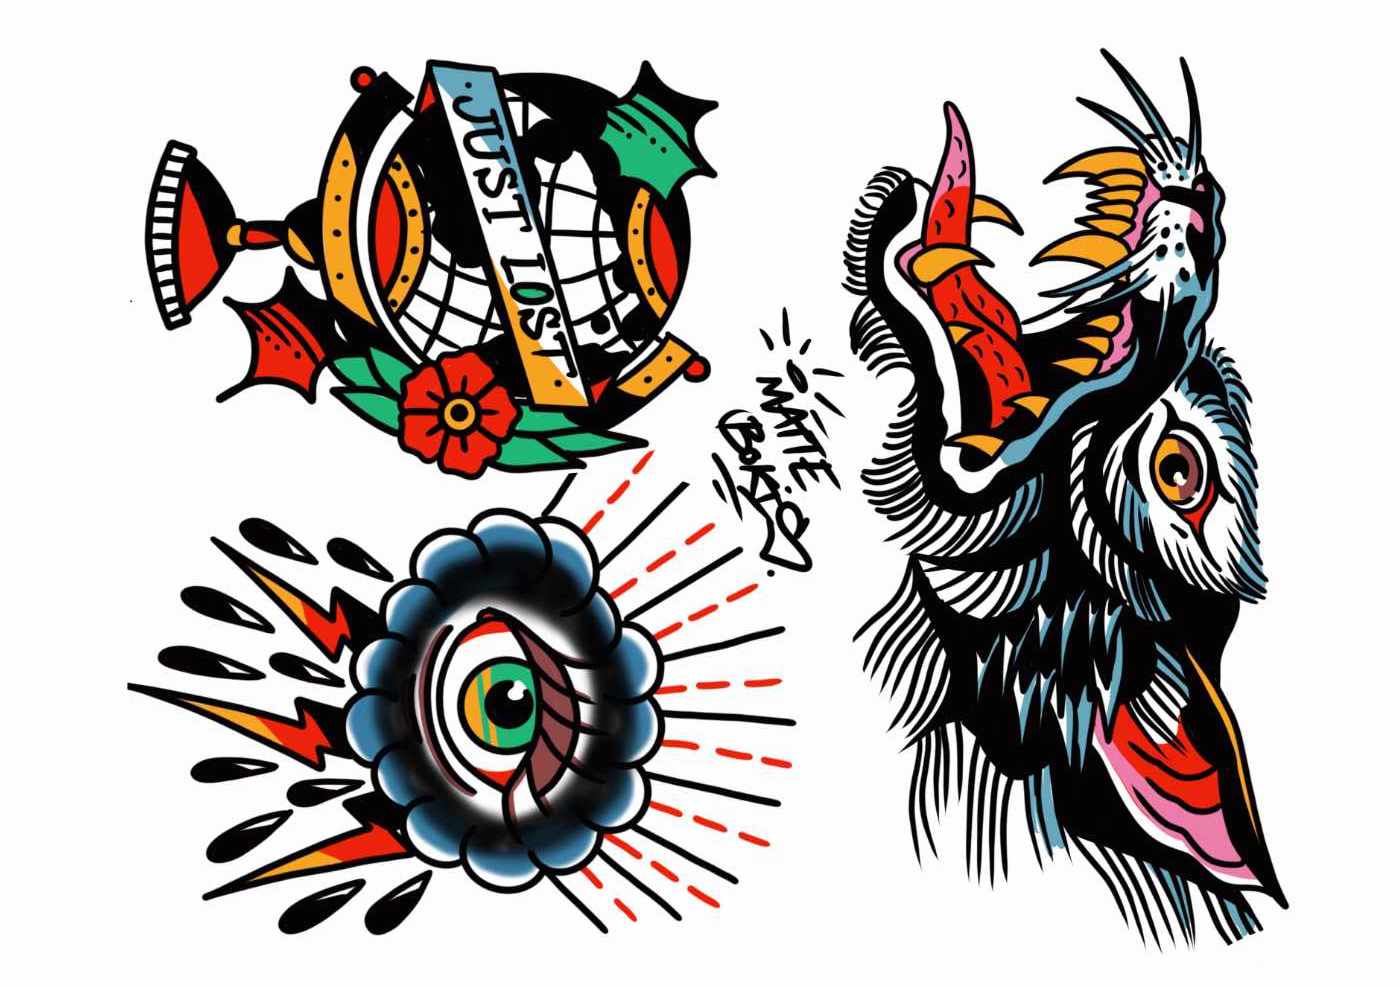 Colorful fake tattoos in old school style featuring a globe, the text "just lost", and a wolf.